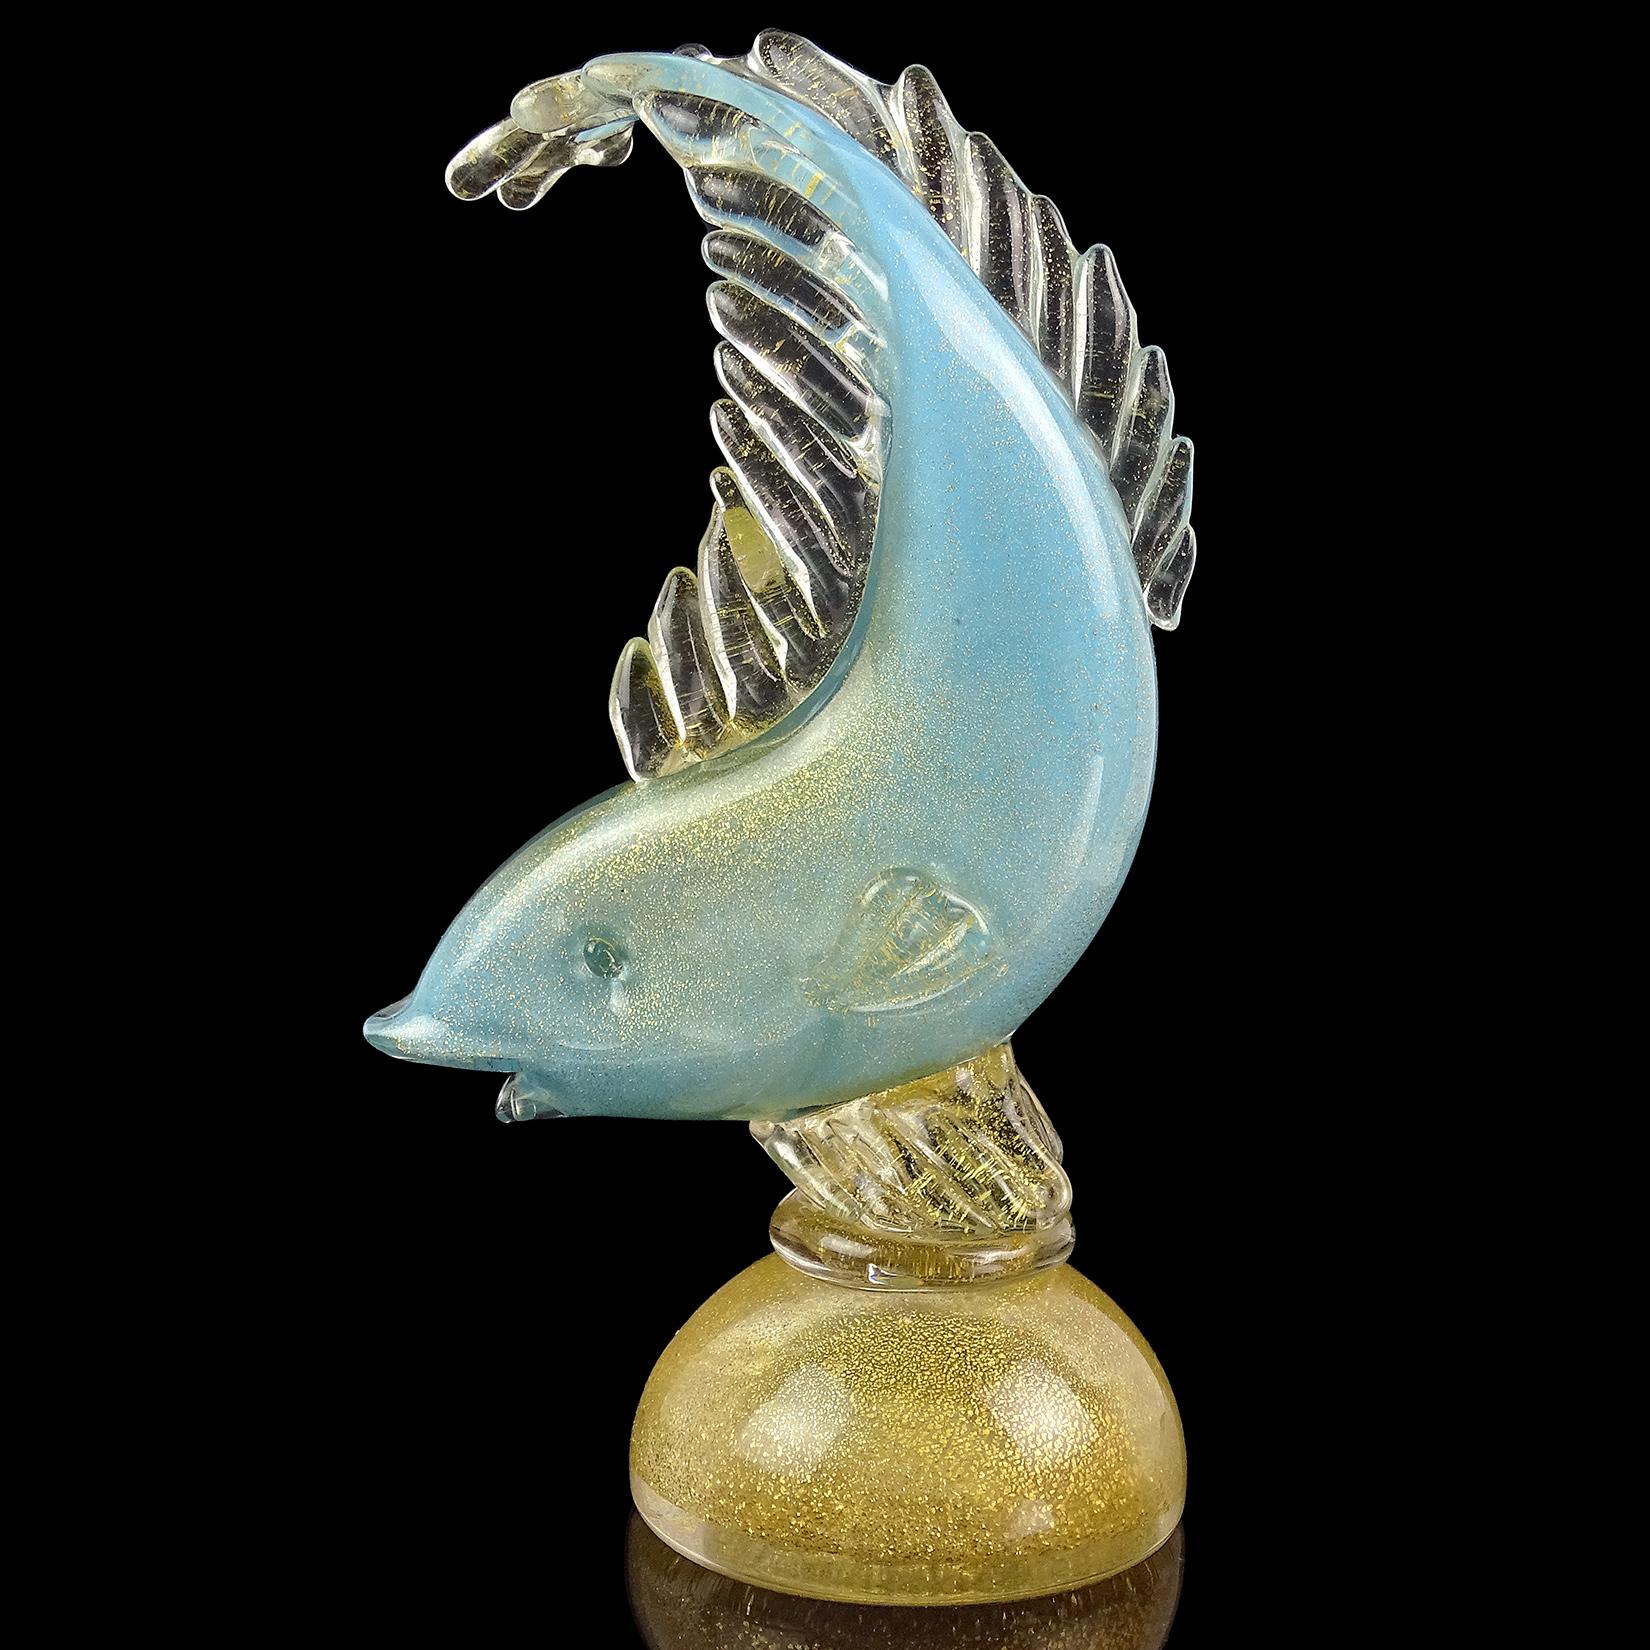 Beautiful vintage Murano hand blown sky blue and gold flecks Italian art glass fish sculpture / figurine. Documented to designer Alfredo Barbini. The leaping fish is profusely covered in gold leaf, and stands on a base with gold as well. Midcentury